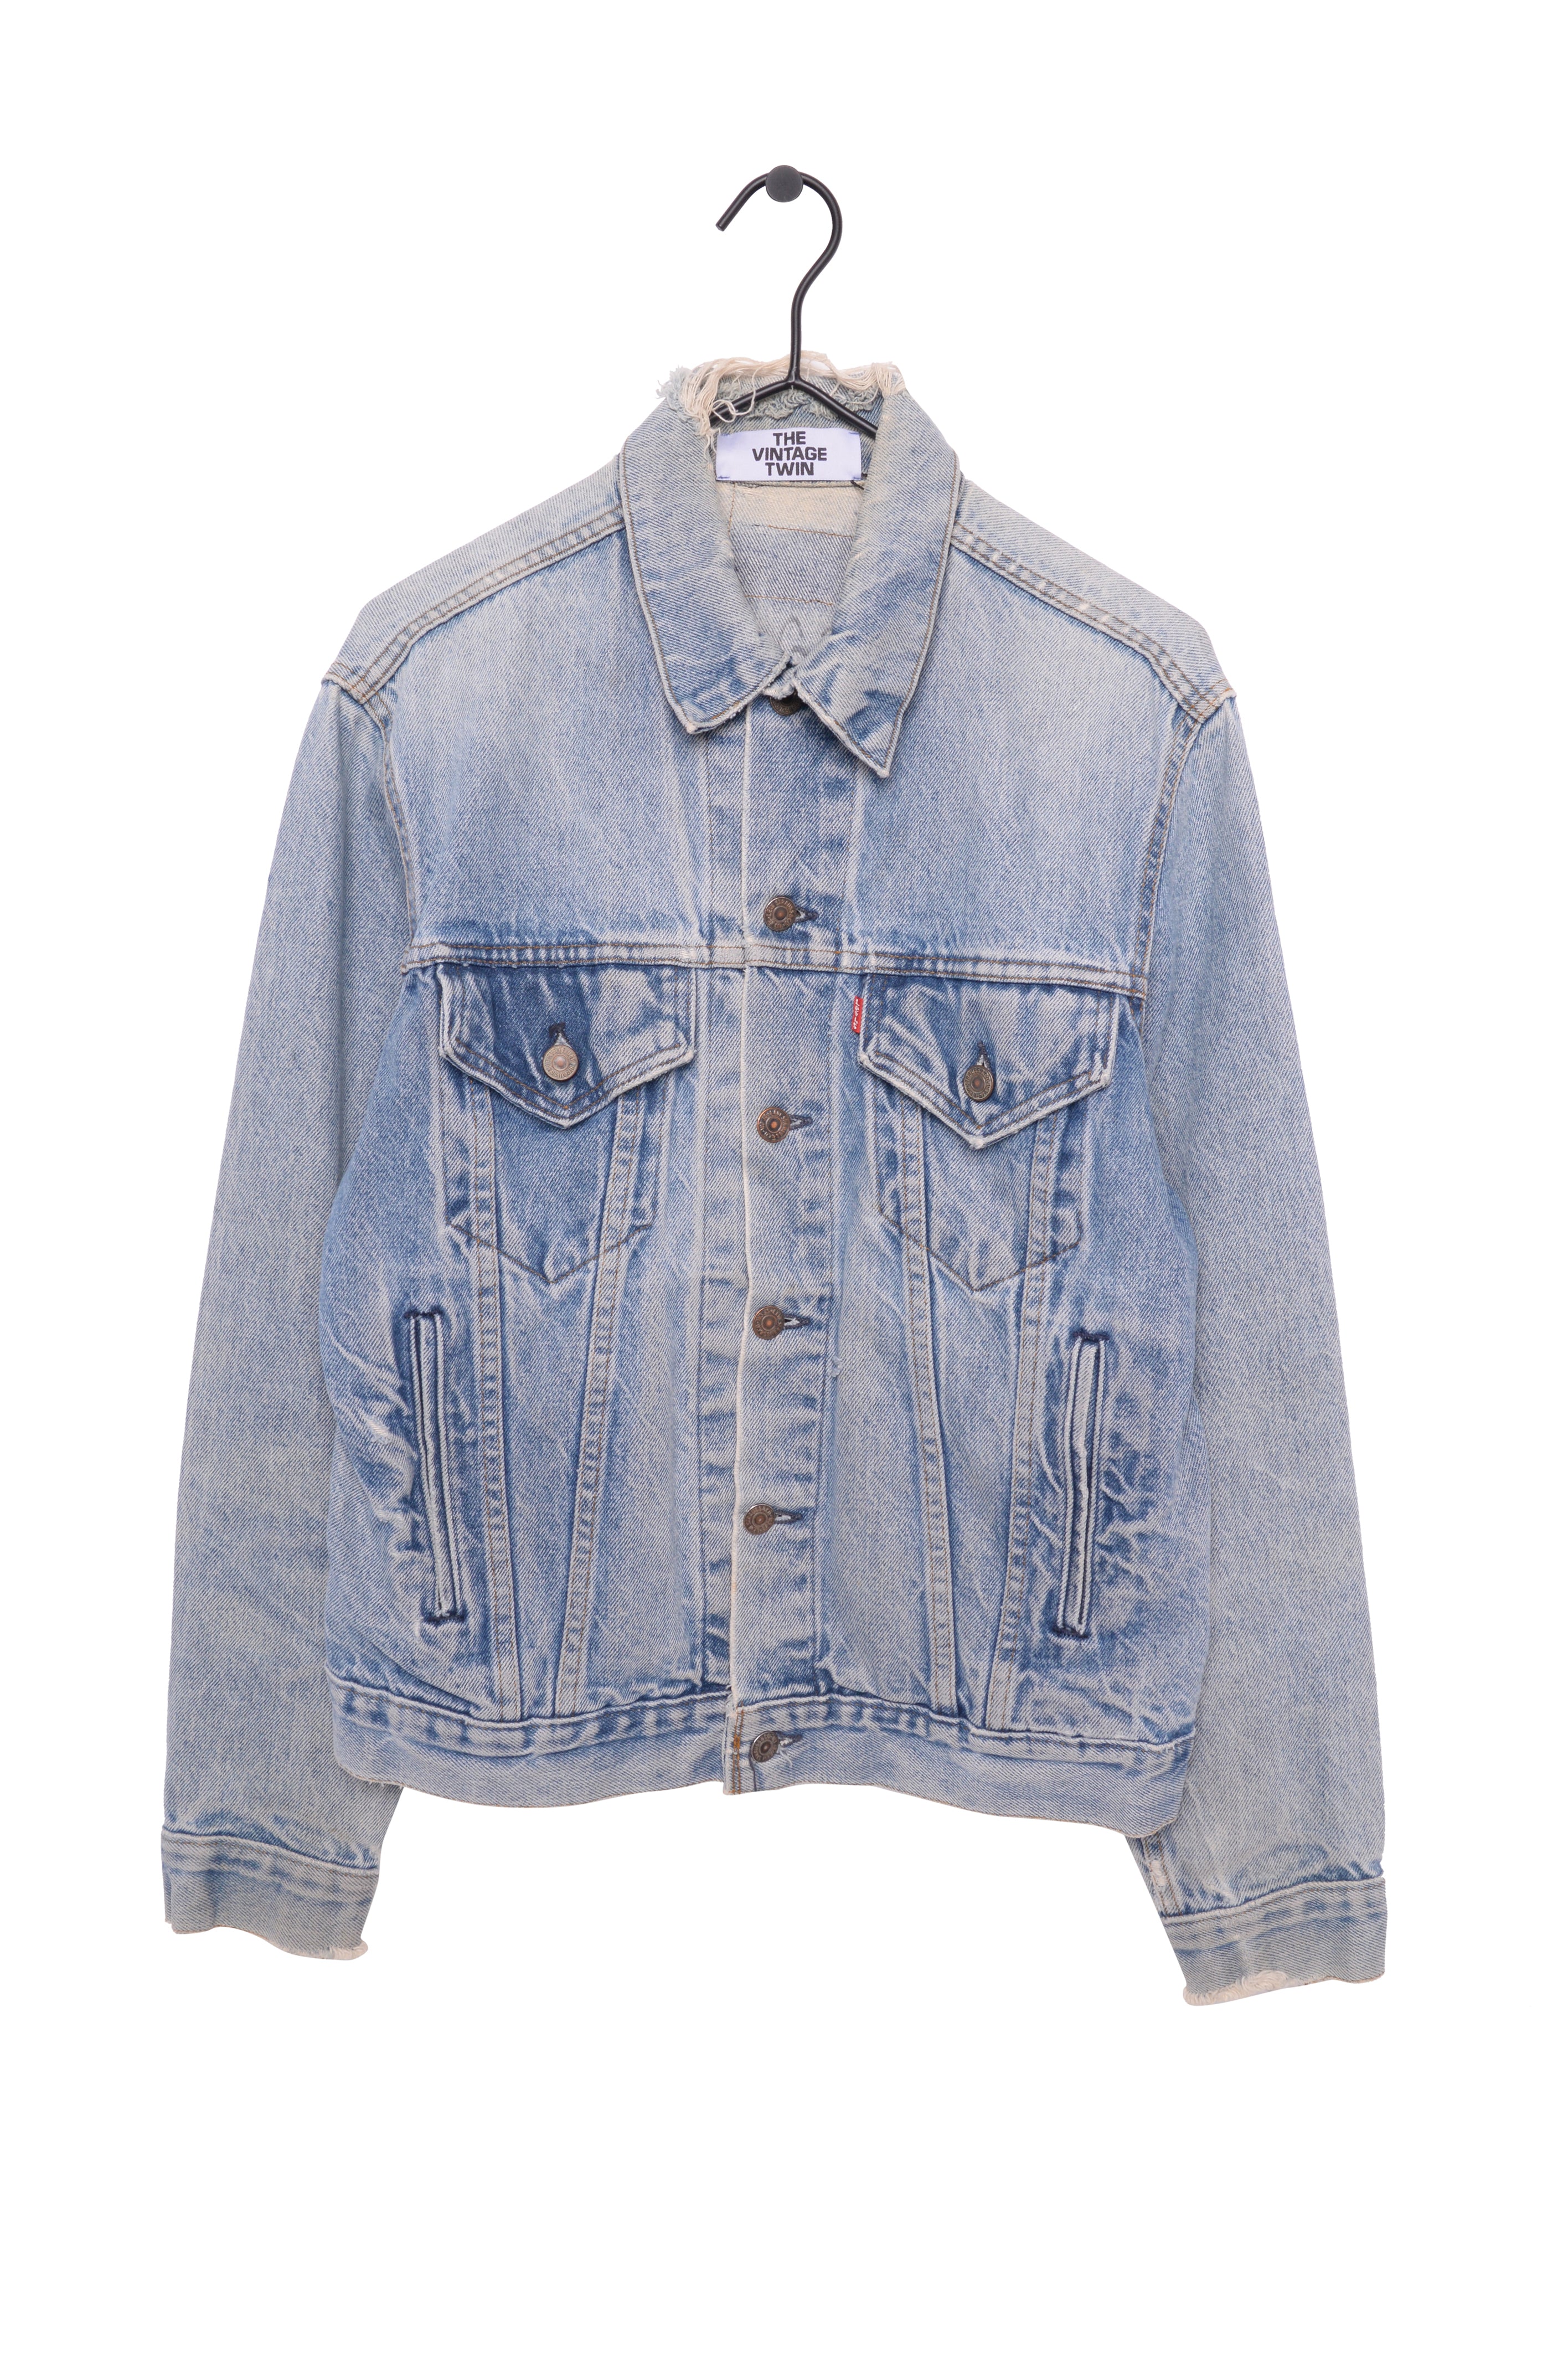 Distressed Levi's Denim Jacket Free Shipping - The Vintage Twin